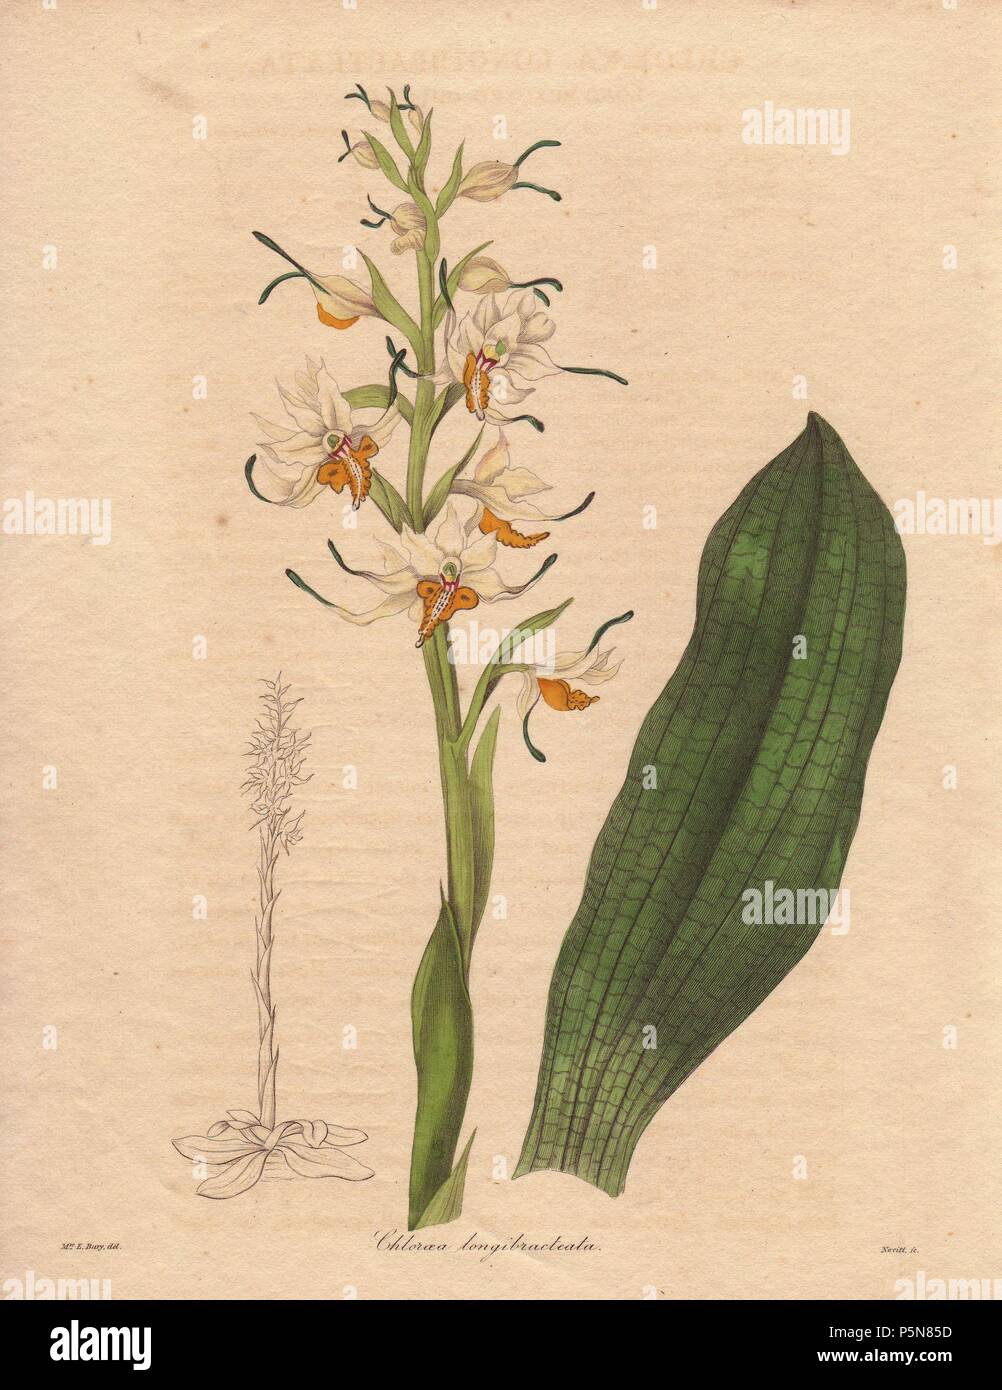 Chloraea or Gavilea longibracteata. . Long-bracted chloraea orchid, with white and yellow flowers.. . Benjamin Maund's The Botanist was a five-volume series that introduced 250 new plants from 1836 to 1842. The series is notable for its many female artists: the plates were drawn by Maund's daughters Sarah and Eliza, Augusta Withers, Priscilla Bury, Jane Taylor, Miss R. Mills among others. The other characteristic is partial colouring - many of the finely detailed copperplate engravings are left with part of the flower and leaves uncoloured. Stock Photo